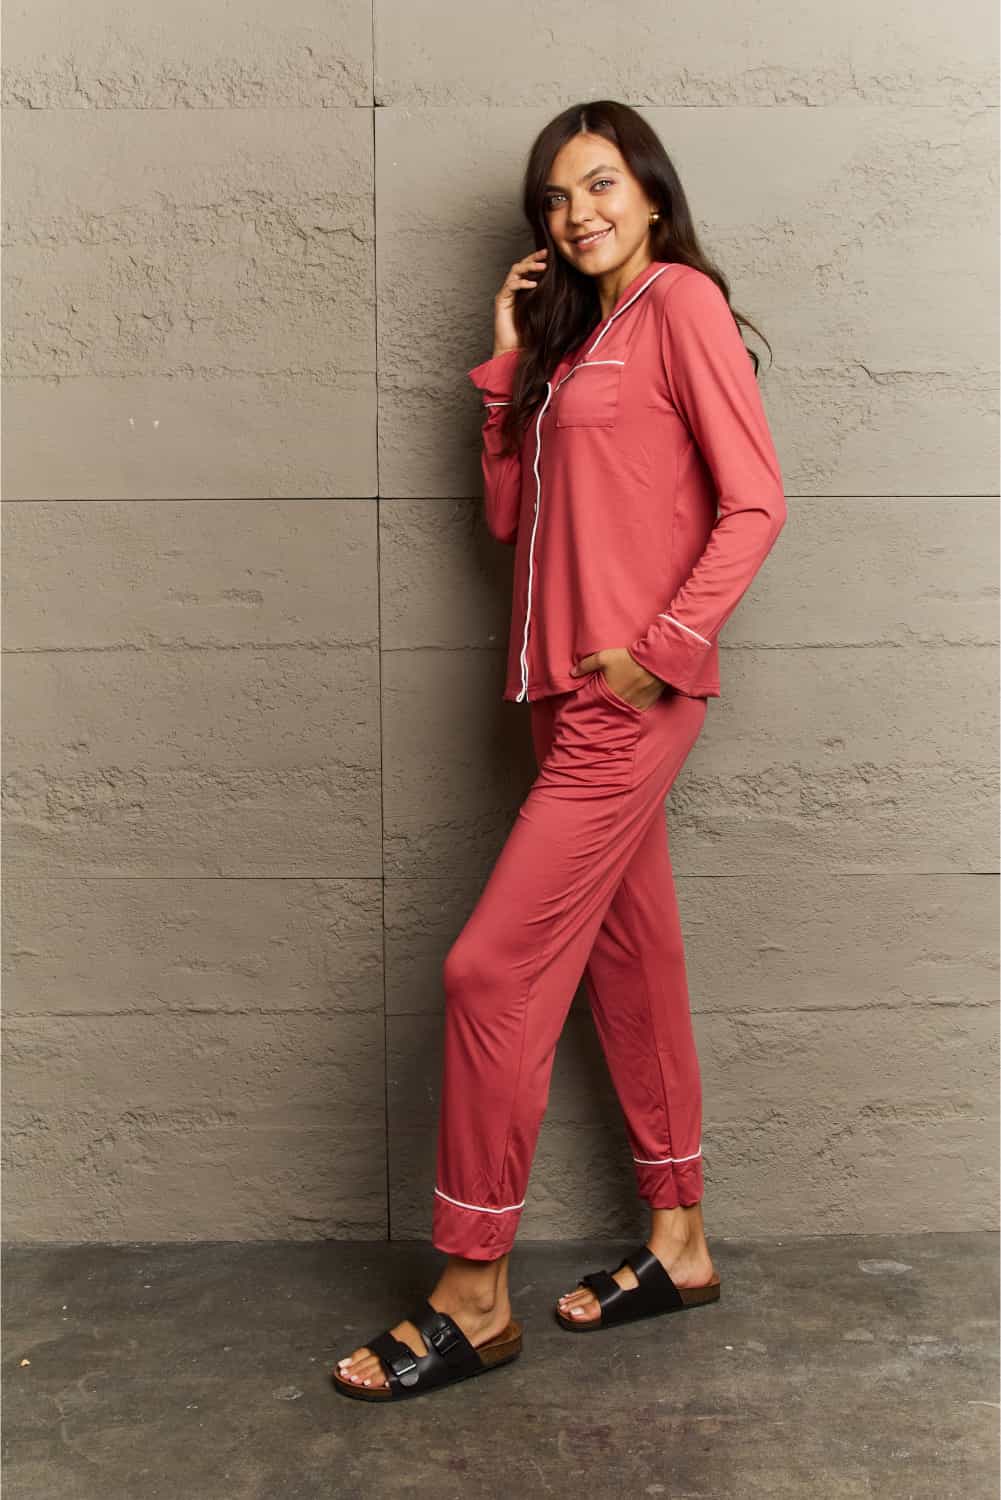 Ninexis Buttoned Collared Neck Top and Pants Pajama Set BLUE ZONE PLANET